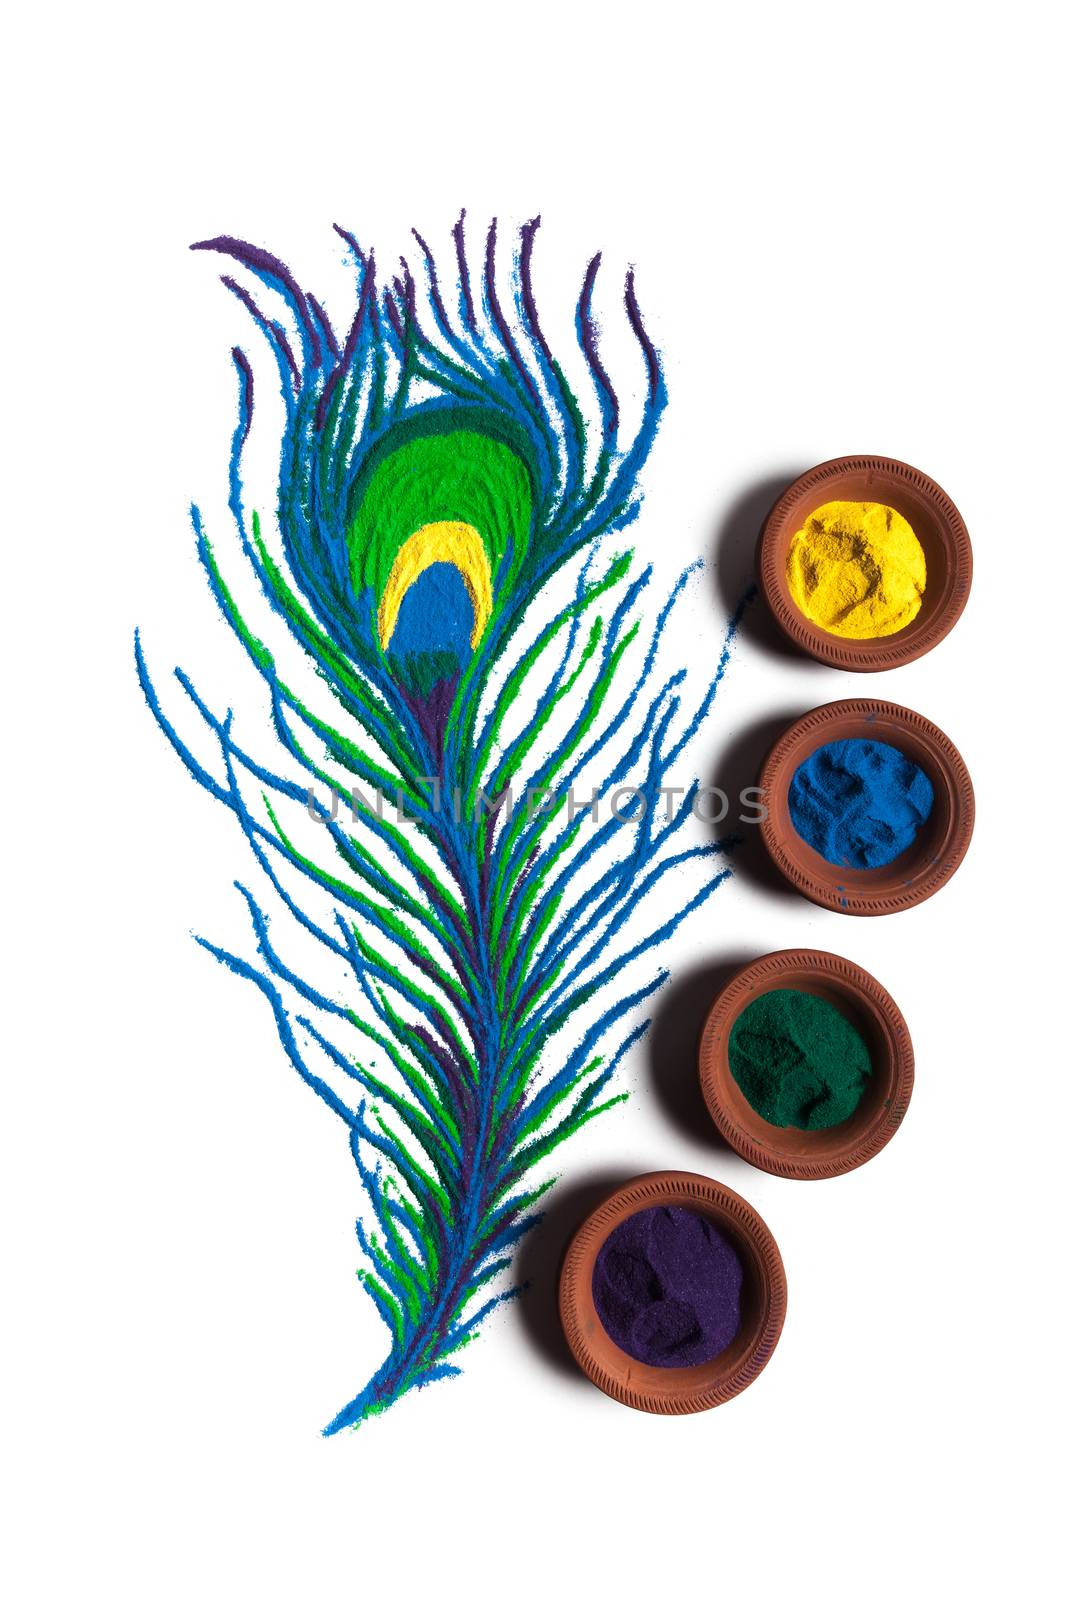 Colorful Peacock feather rangoli made of handmade soil colors with clay pots on white background.